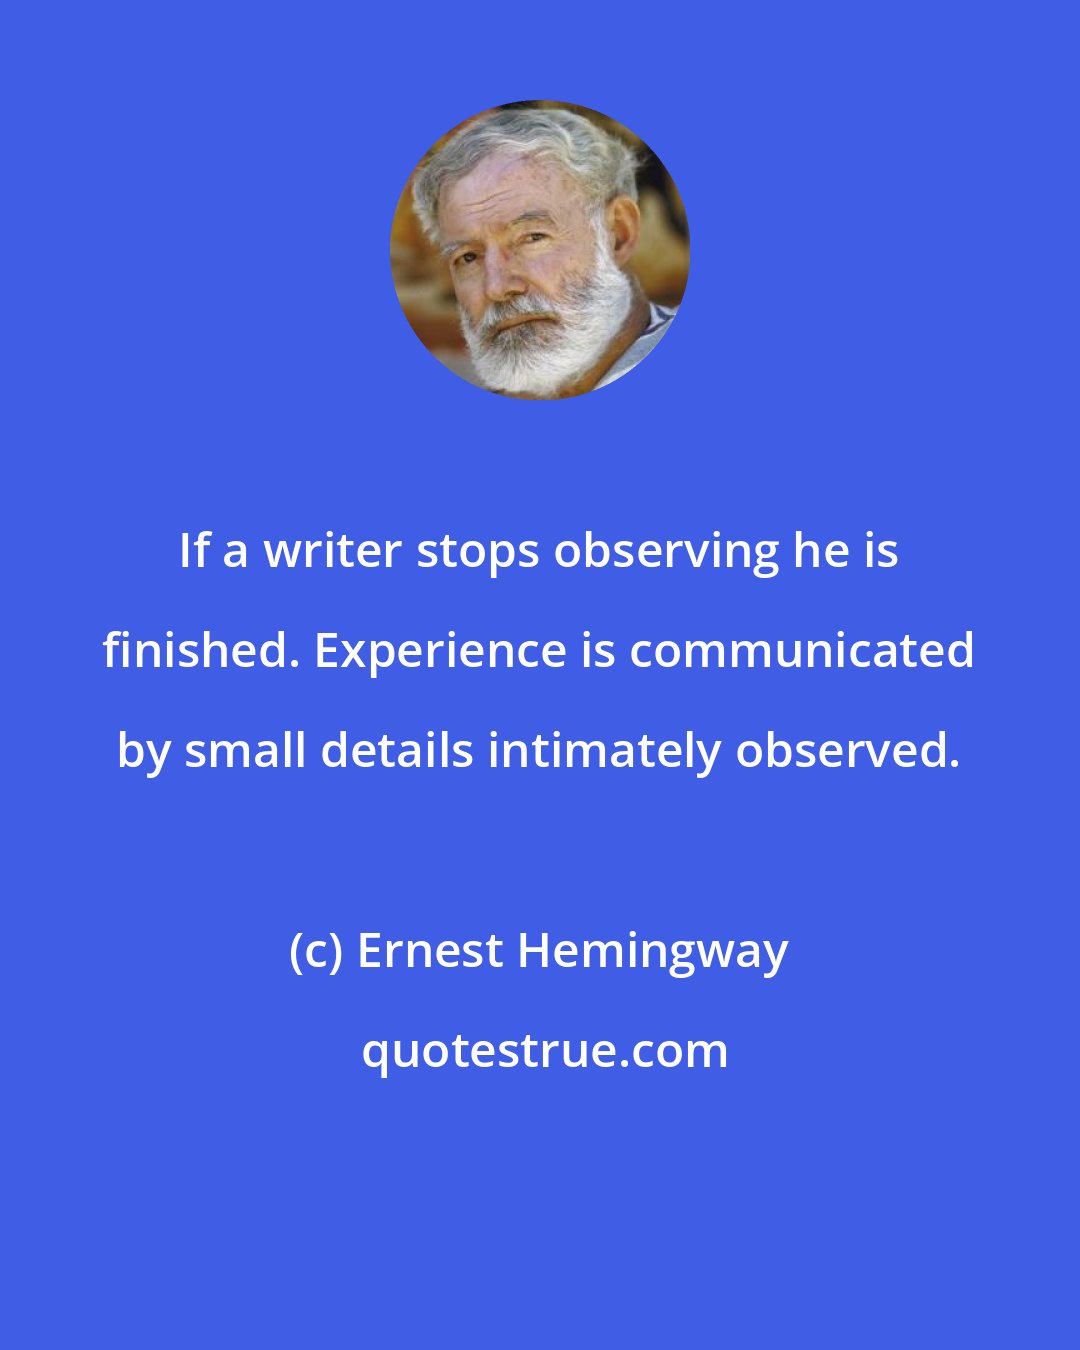 Ernest Hemingway: If a writer stops observing he is finished. Experience is communicated by small details intimately observed.